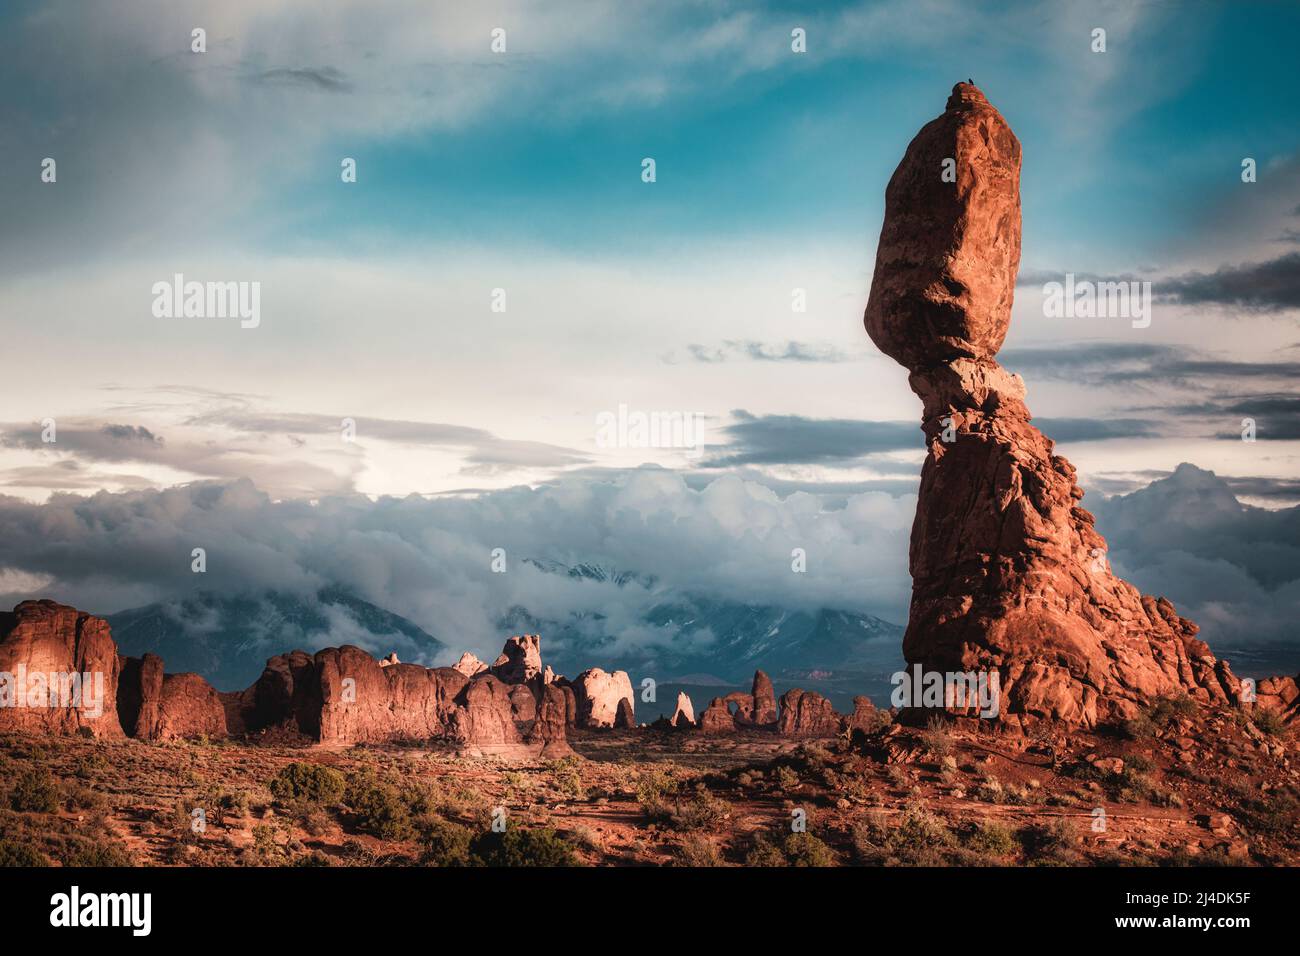 Balance Rock rises out of the rocky desert landscape in Arches National Park, Utah. Stock Photo